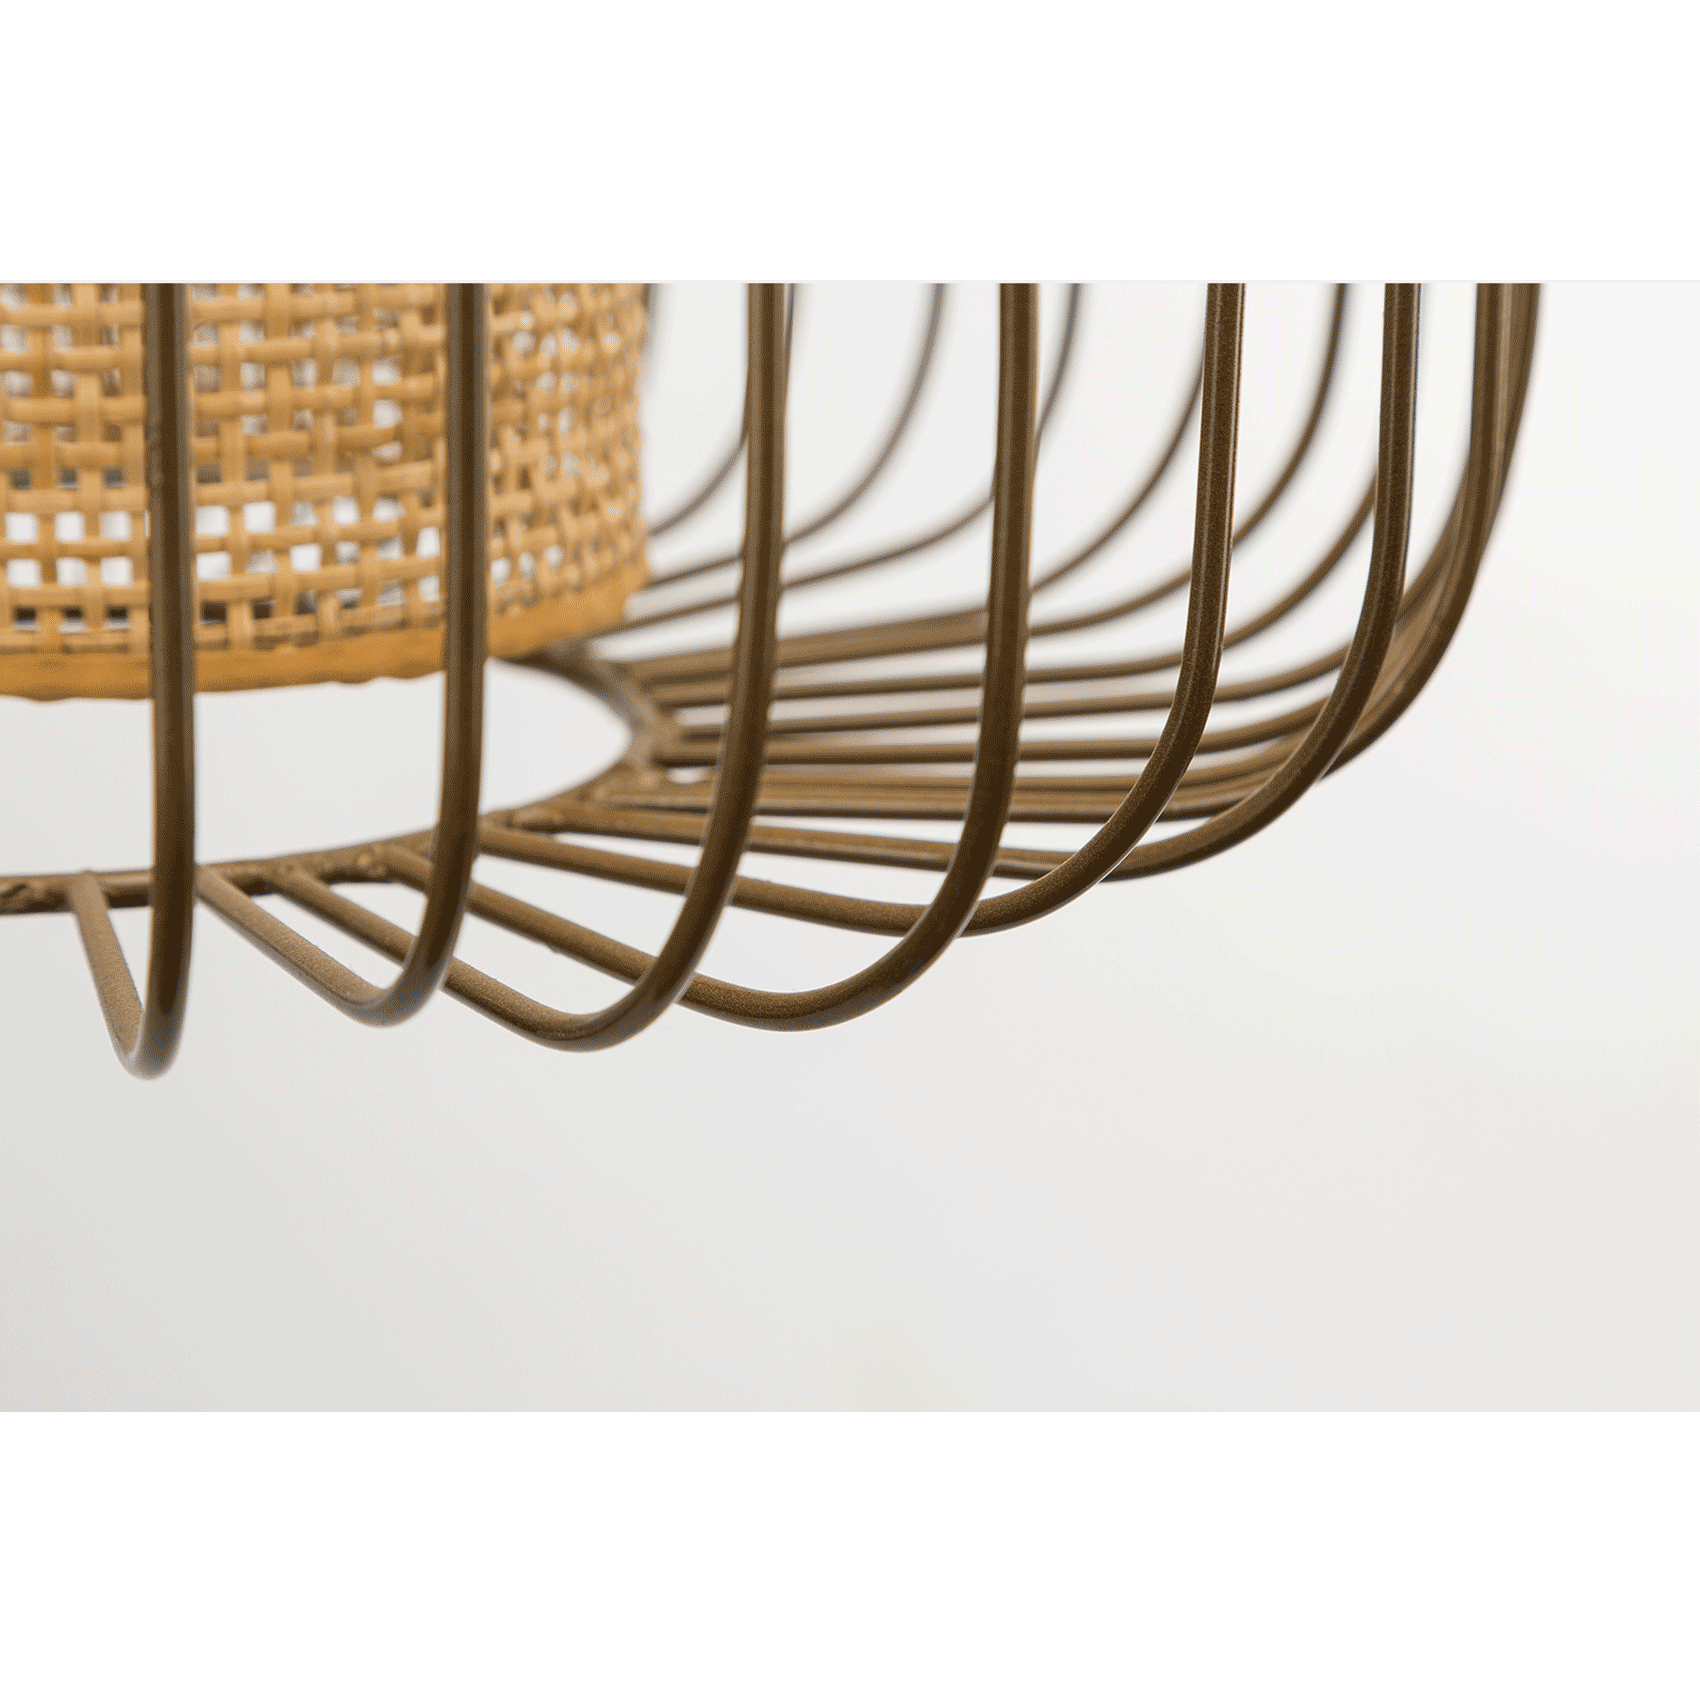 Buy Handcrafted Metal and Rattan Suspended lights 